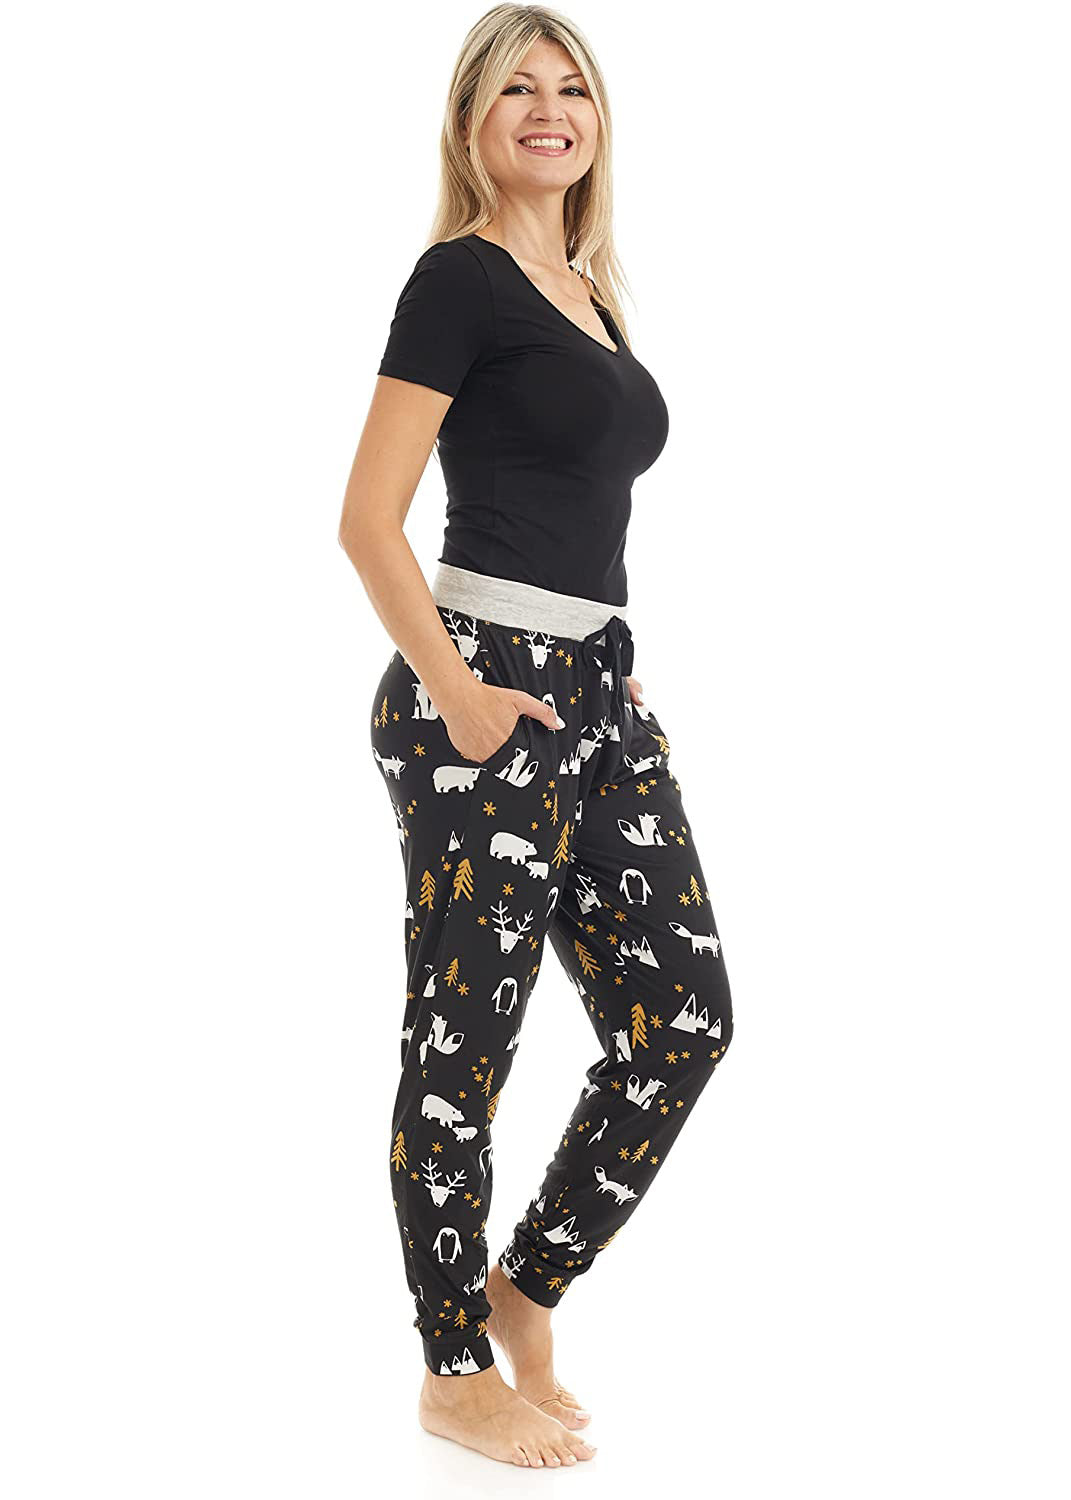 
                  
                    PJ joggers with soft velvety texture, stretch, elastic waistband, drawstring, and stylish ankle cuff. This pattern is little woodland creatures, like a foxm deer, penguin, and some mountains, trees. The pattern is gold and white on a black background. The waist is light grey with a black drawstring.
                  
                